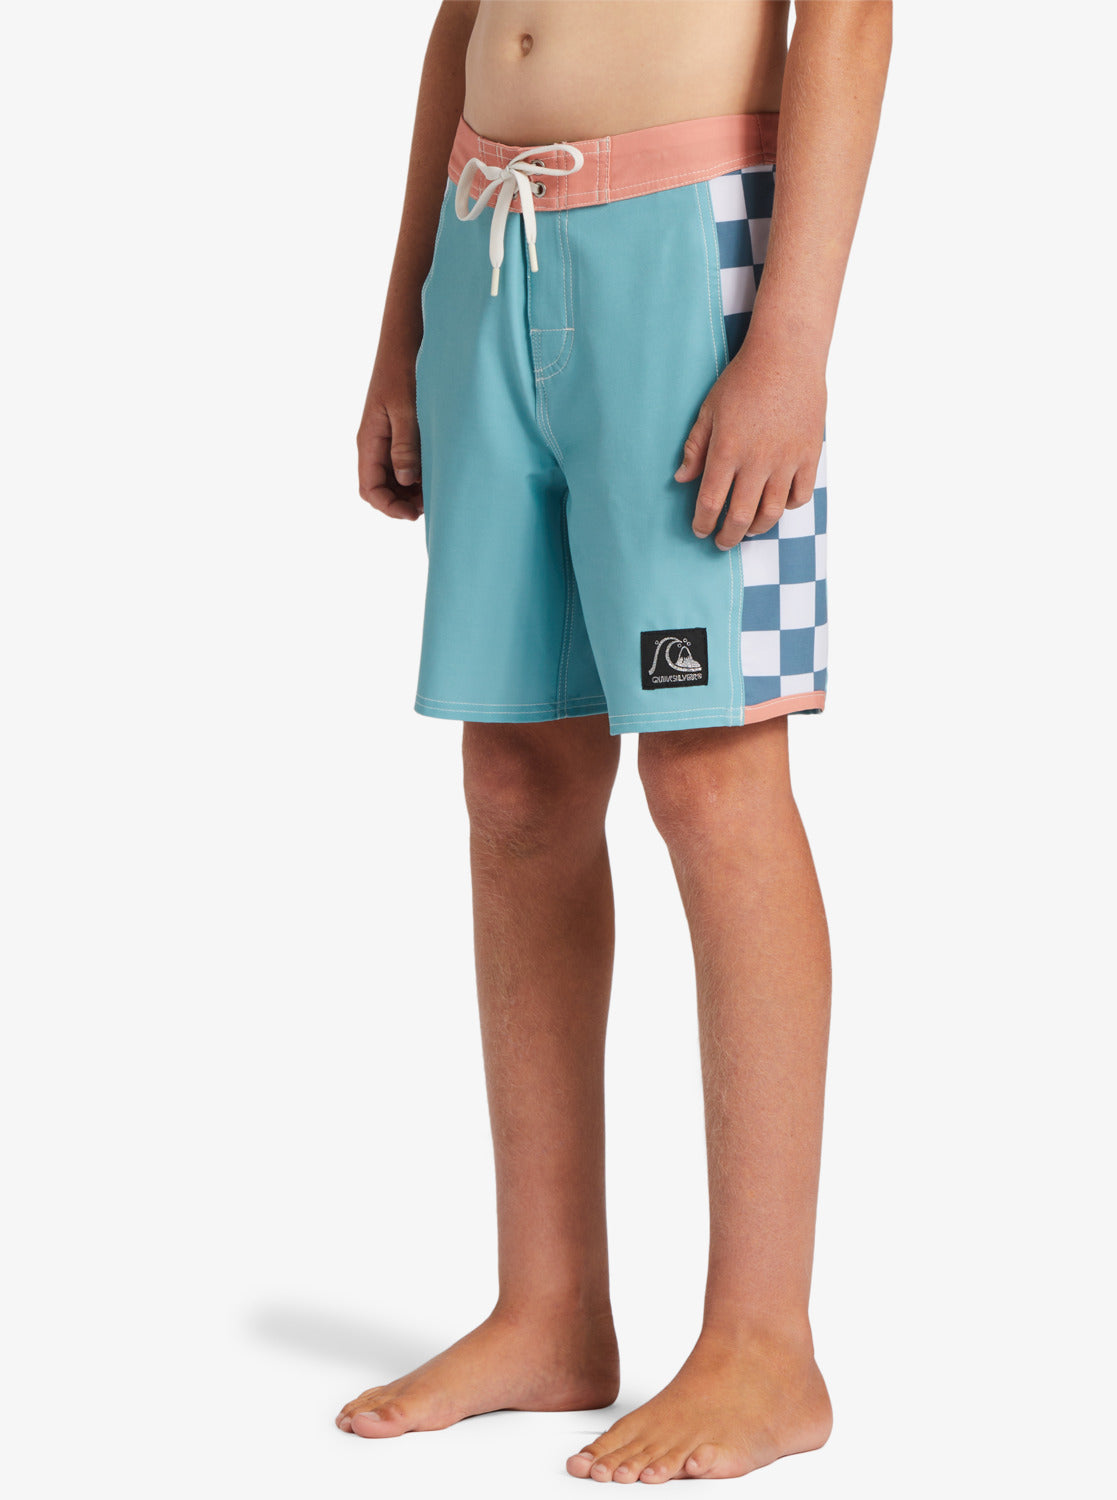 Quiksilver Longboard Volley Shorts in reef waters colourway from side